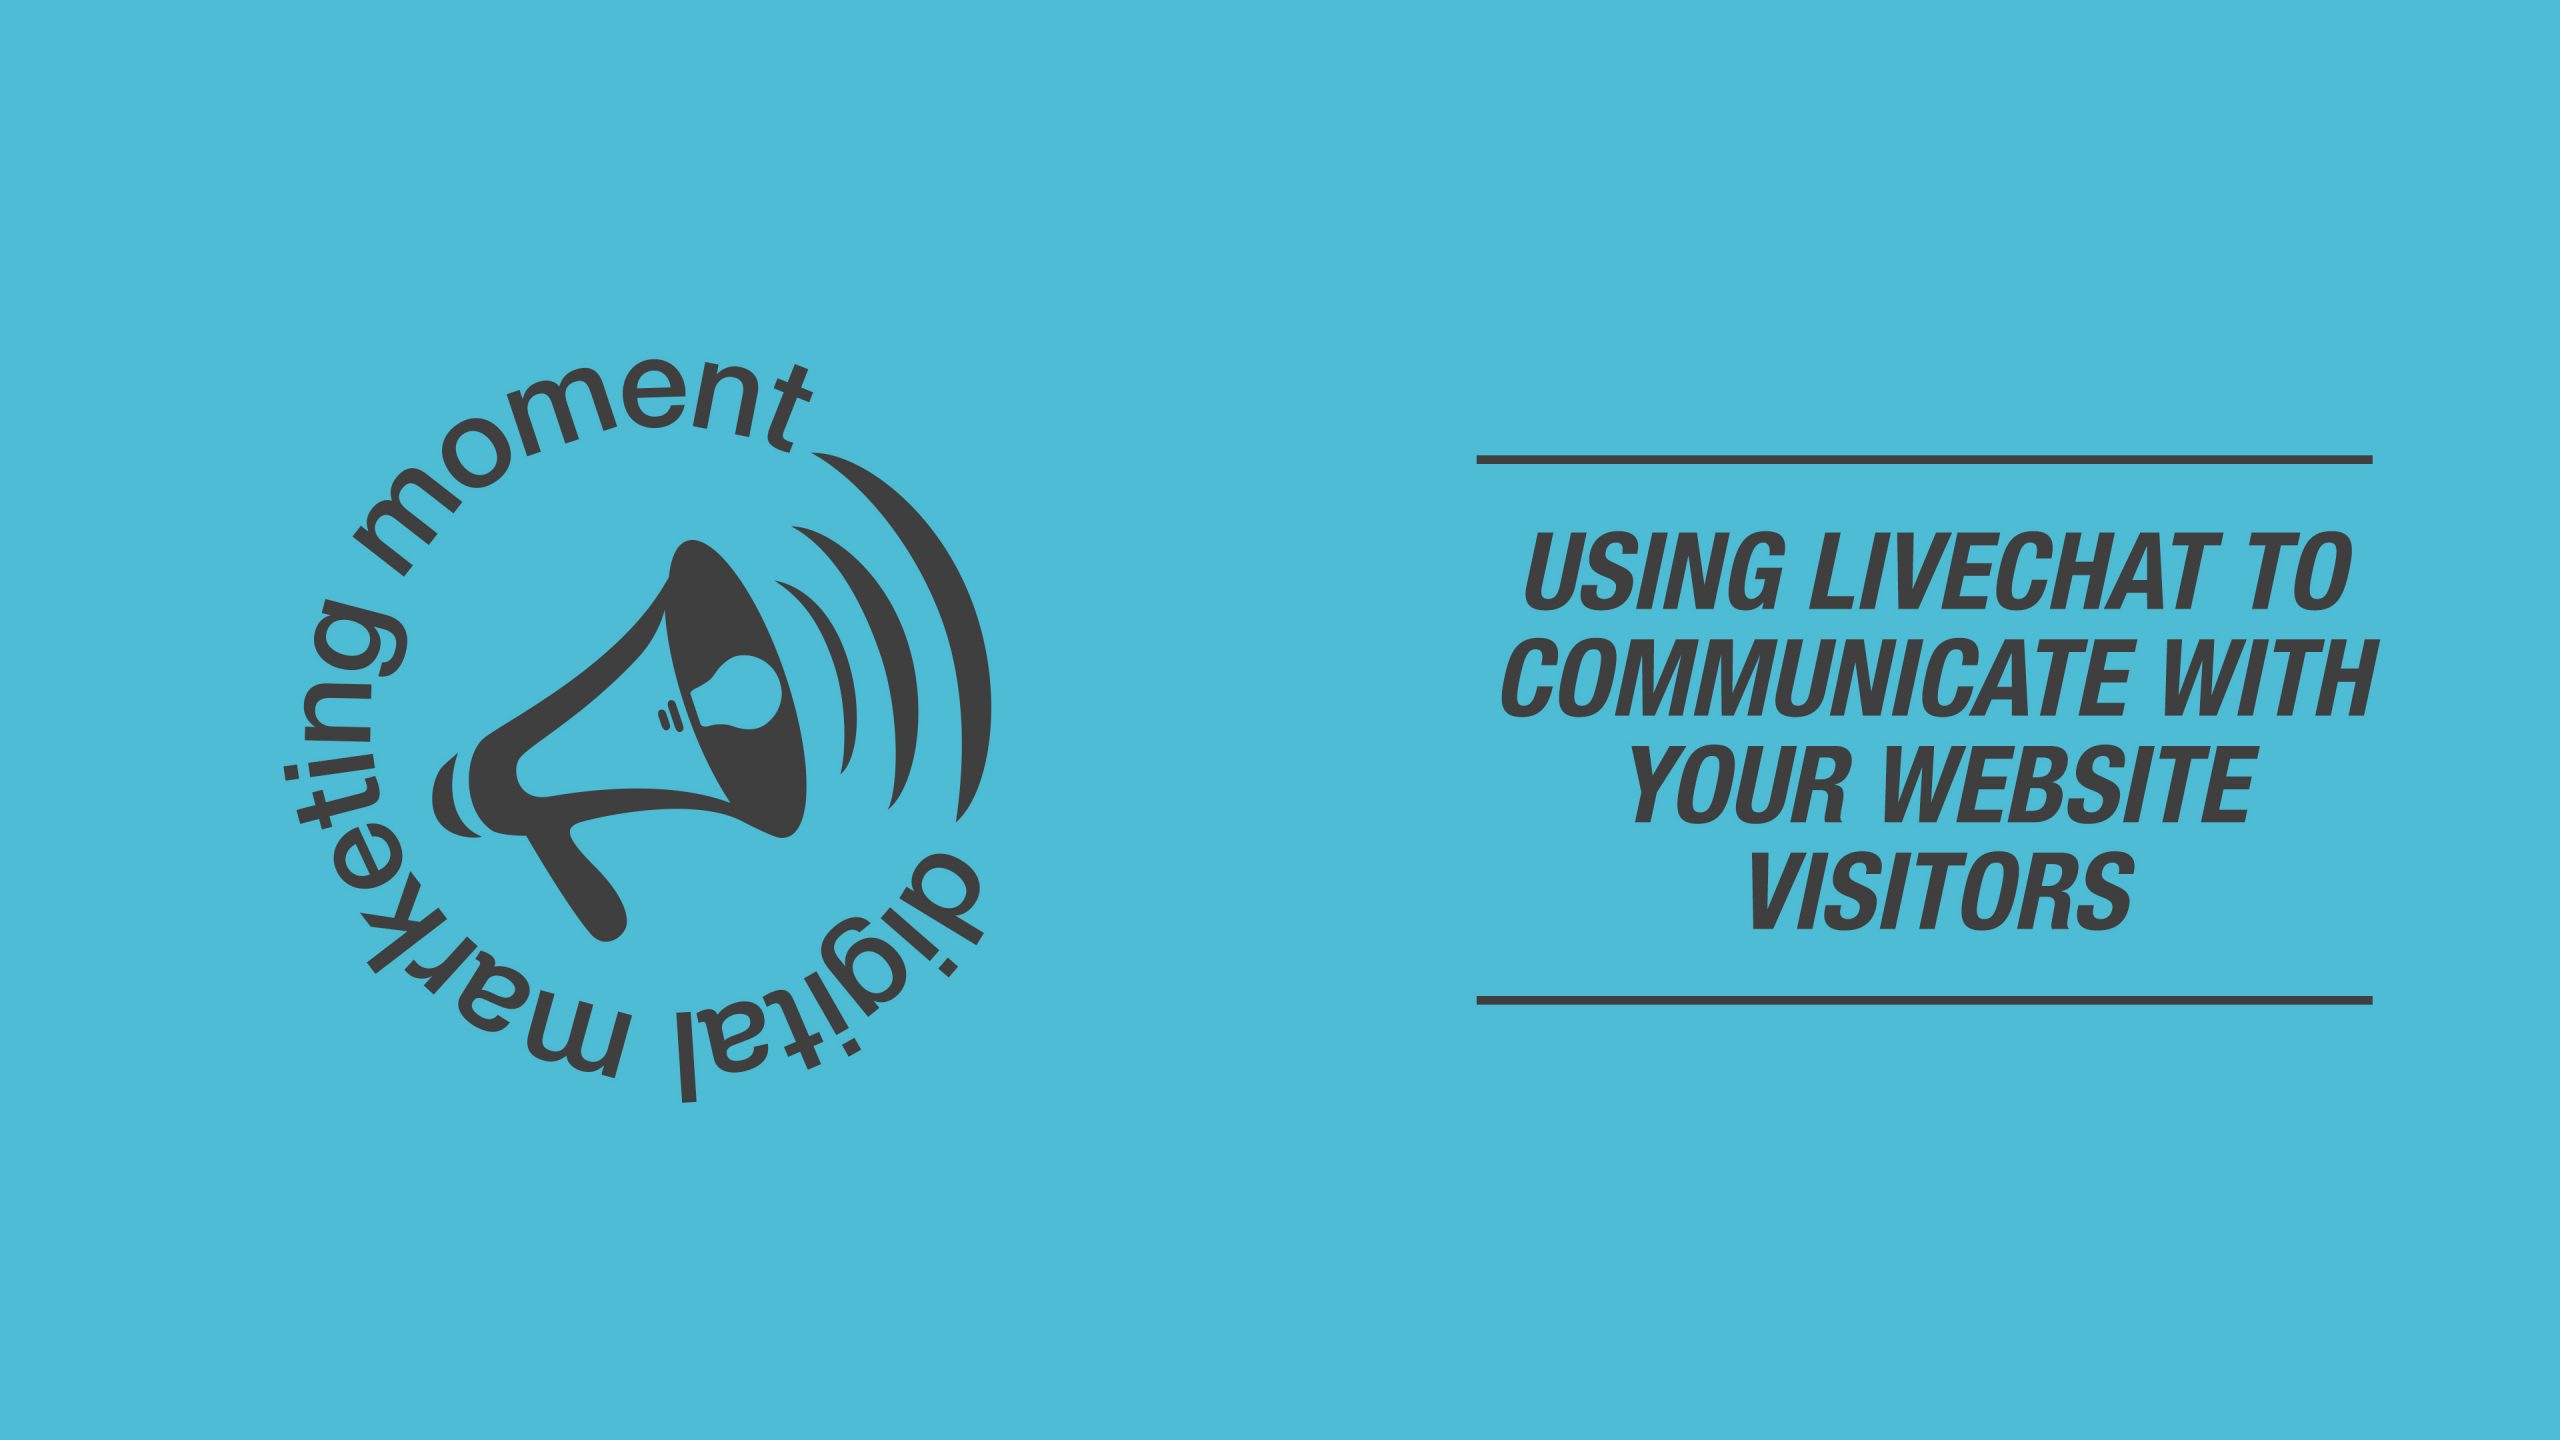 Using Live Chat as a Communication Method on Your Website